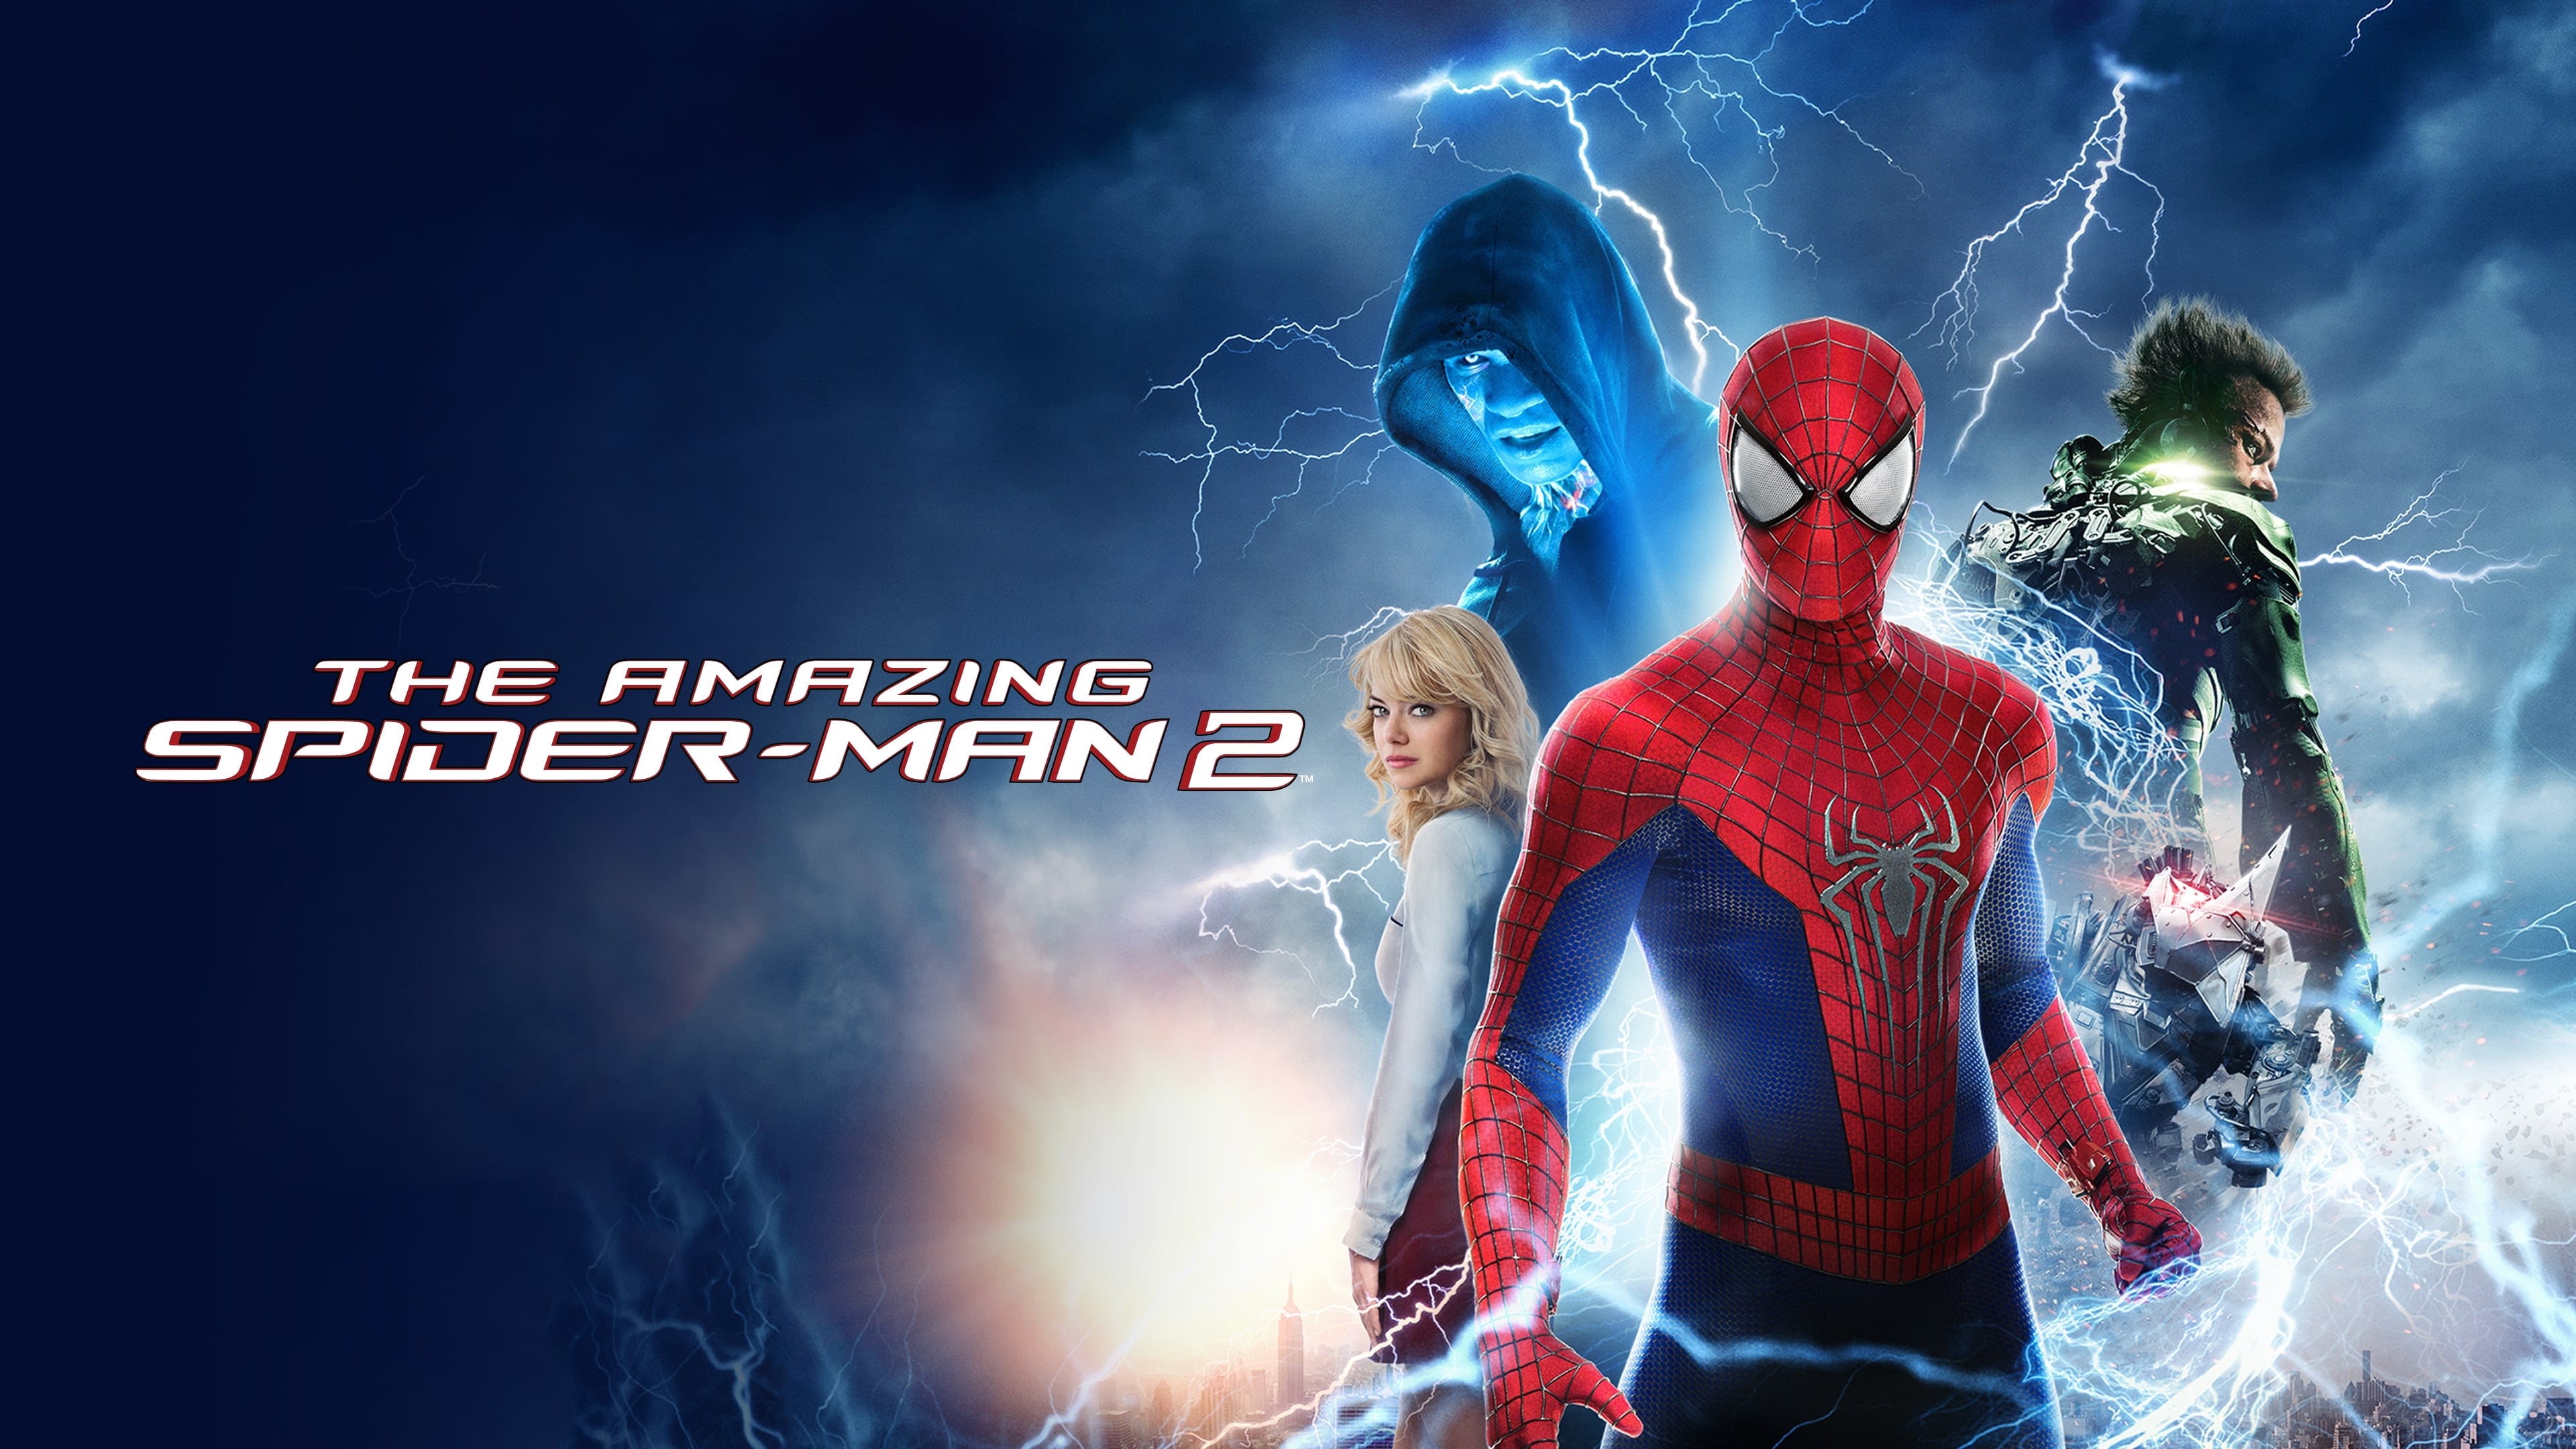 the amazing spider man 2, movie, andrew garfield, electro (marvel comics), emma stone, green goblin, gwen stacy, harry osborn, max dillon, peter parker, spider man lock screen backgrounds